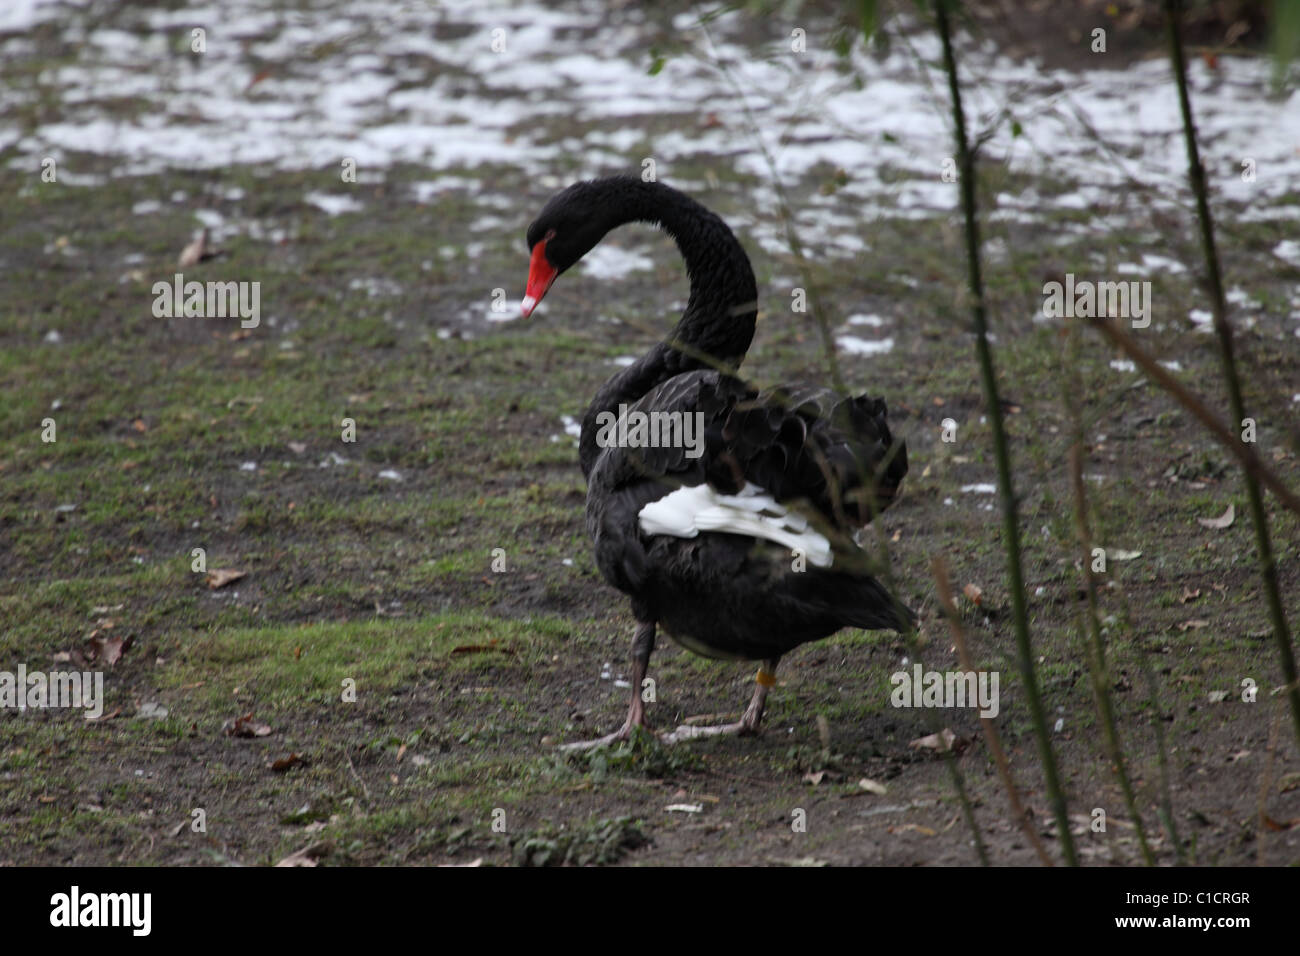 Sammenbrud Sorg materiale Swan Paris High Resolution Stock Photography and Images - Alamy